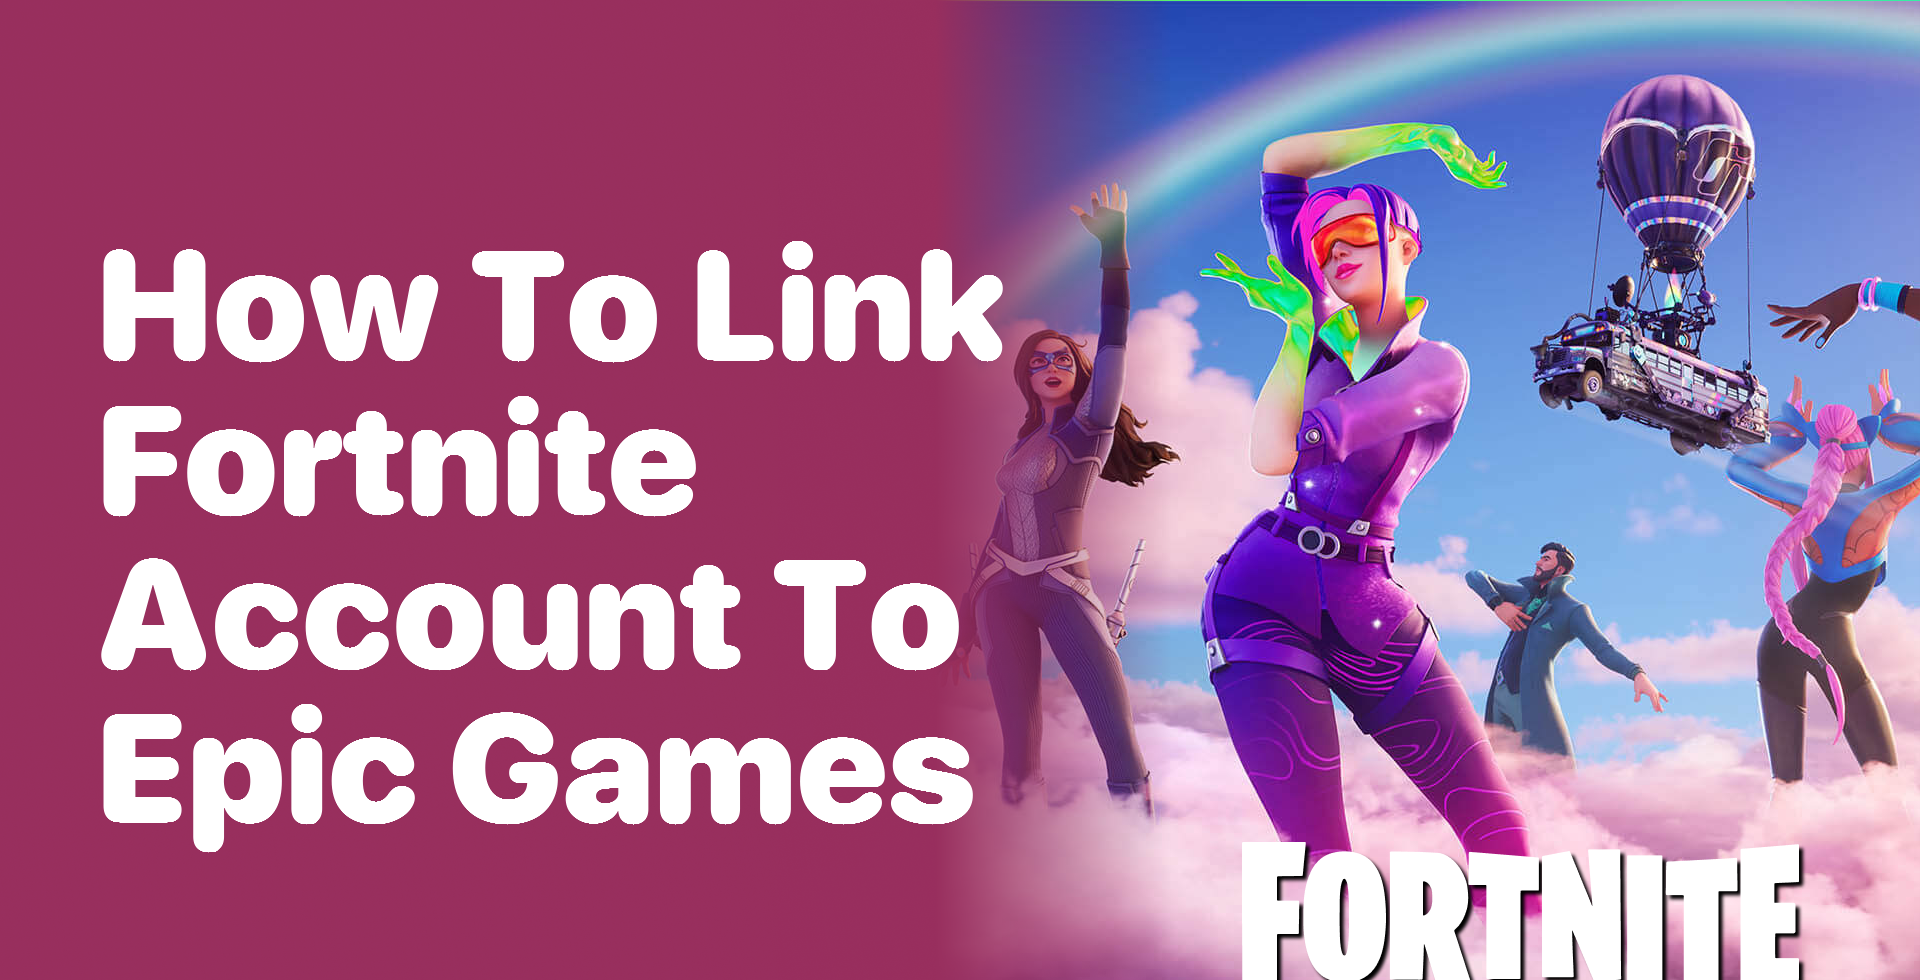 How to link Fortnite Accounts